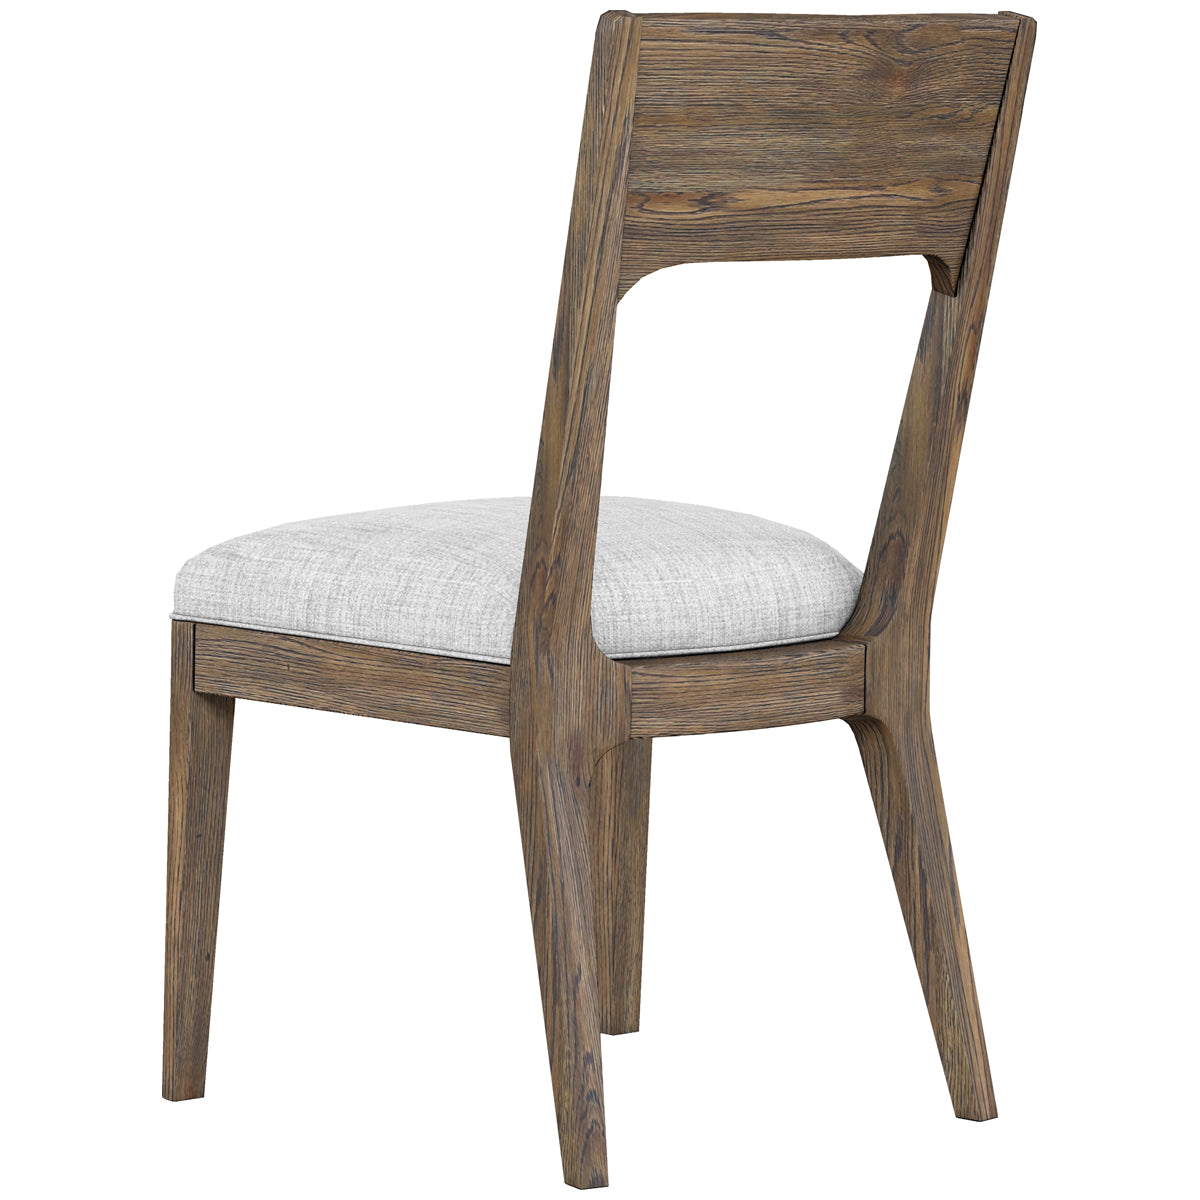 A.R.T. Furniture Stockyard Side Chair, Set of 2